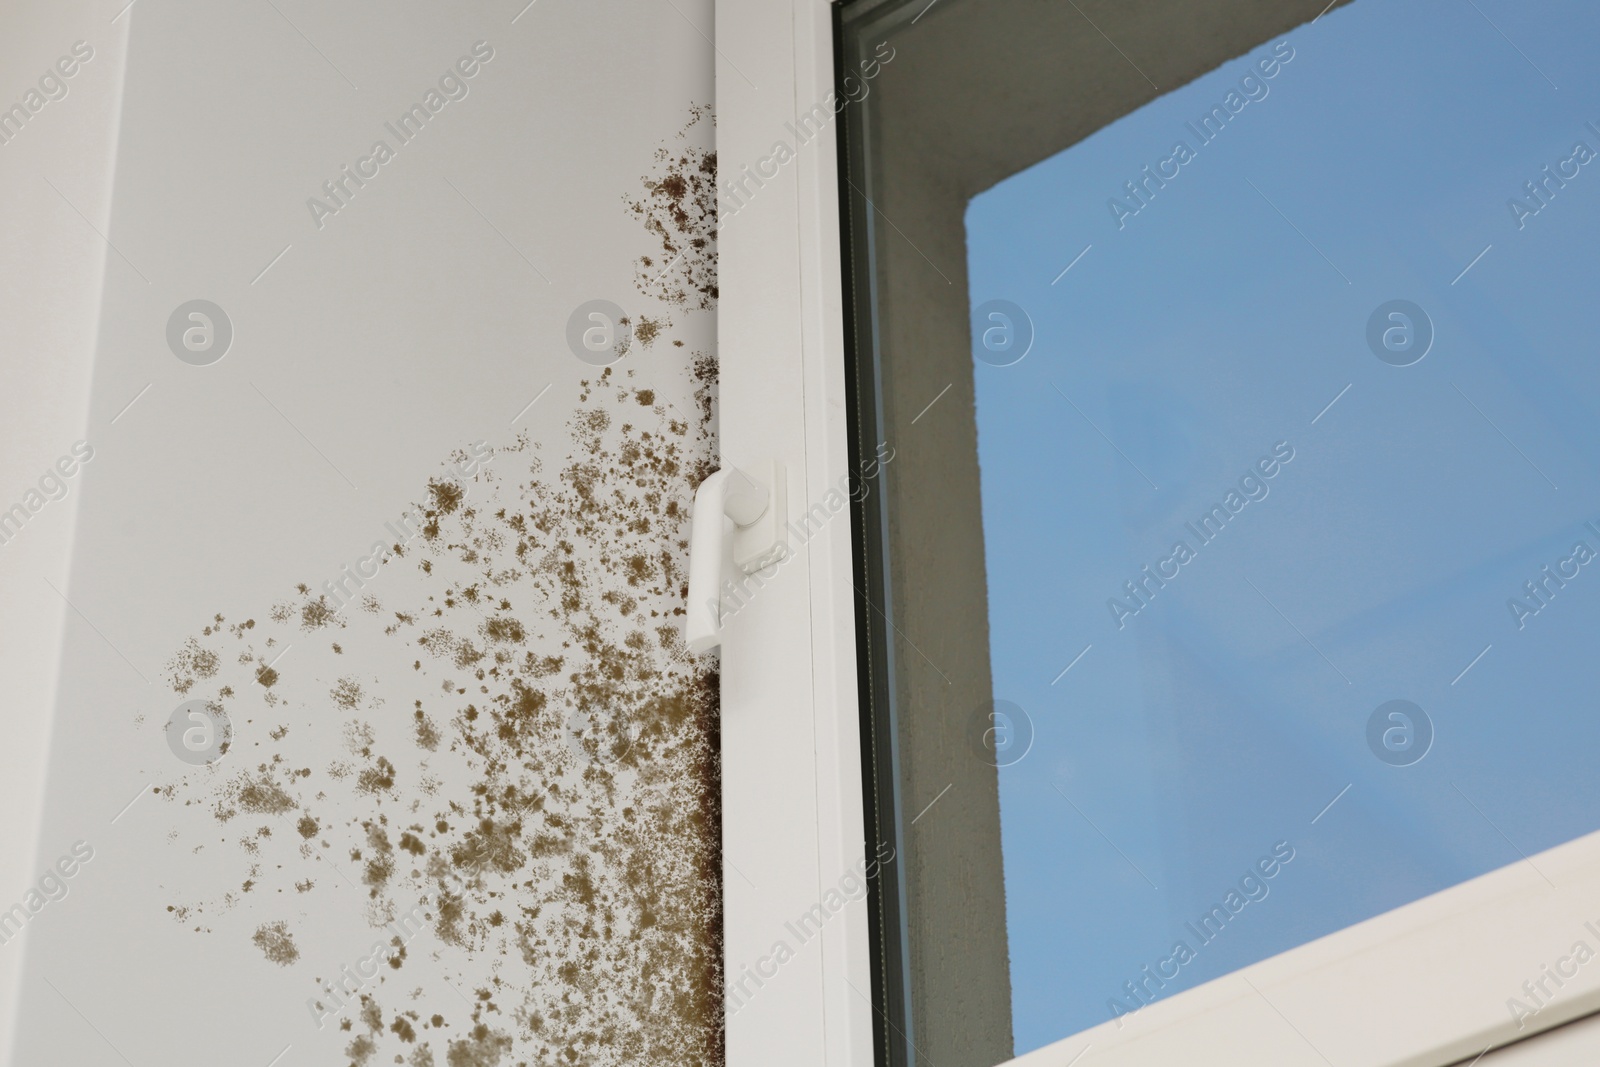 Image of Window slope affected with mold in room